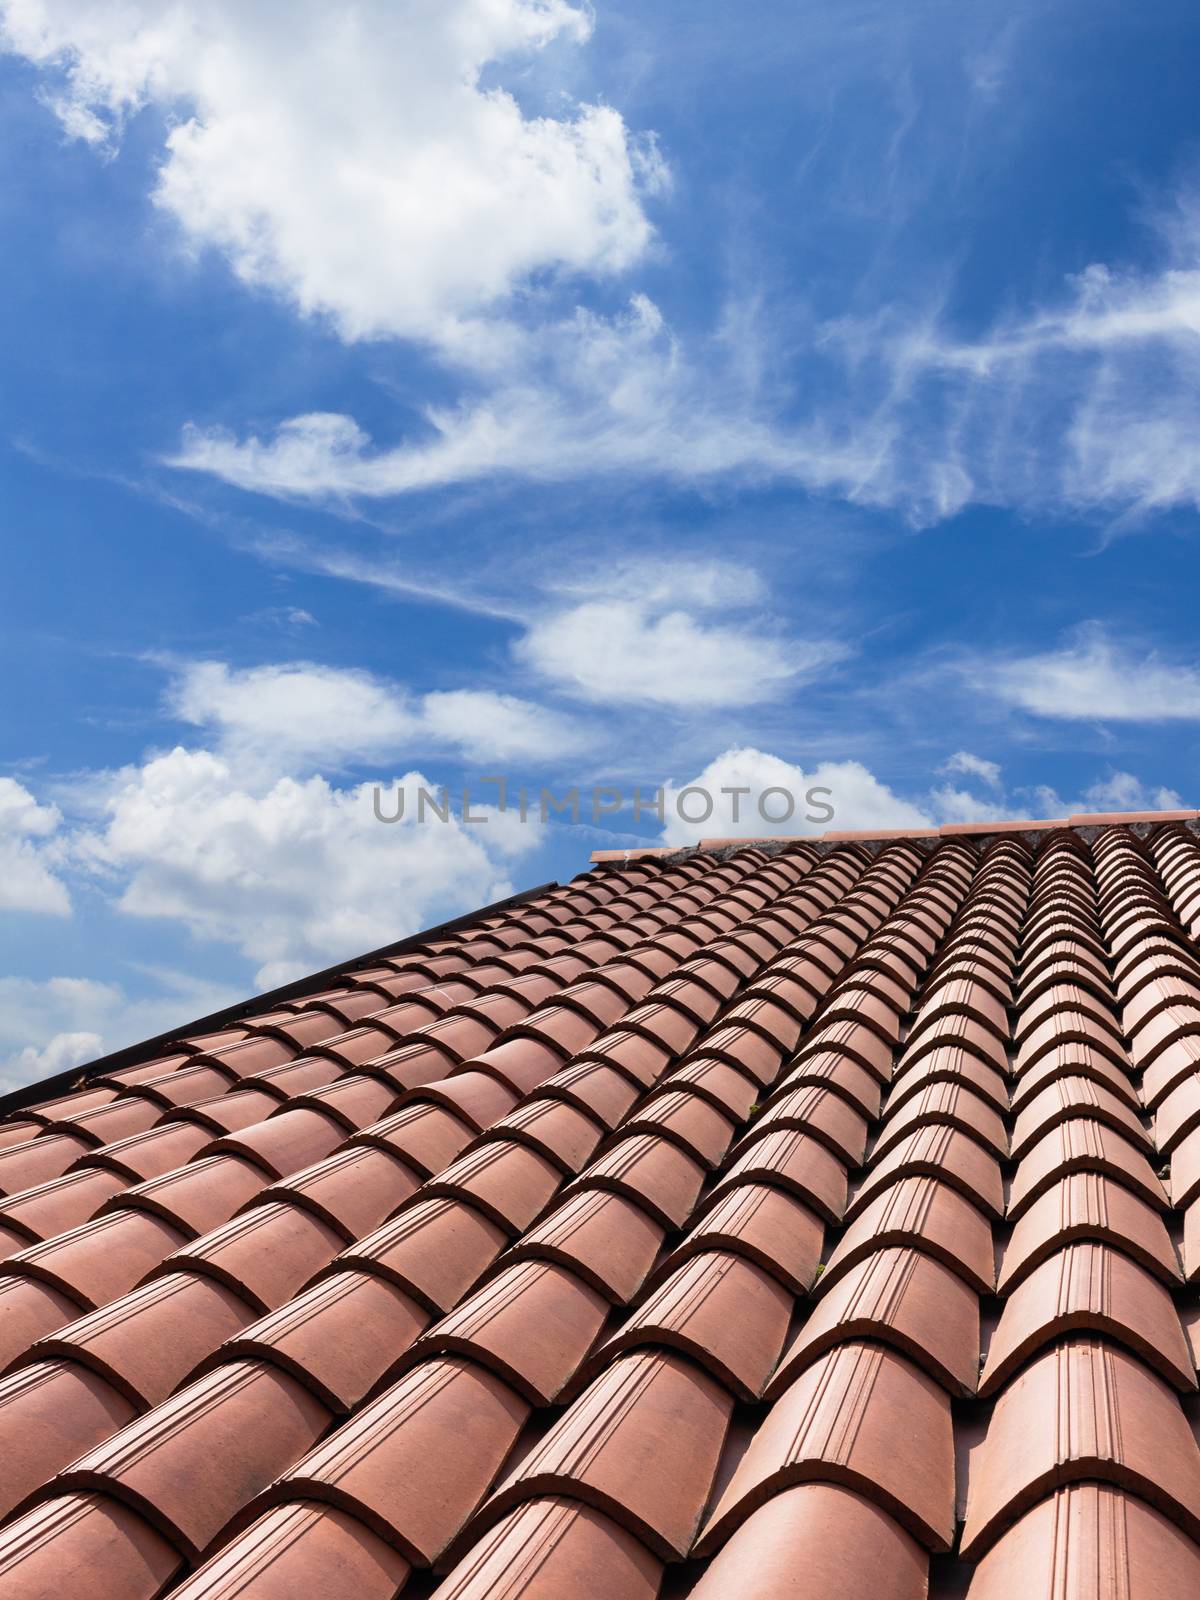 New tiled roof. Vertical view of a tiled roof brown.